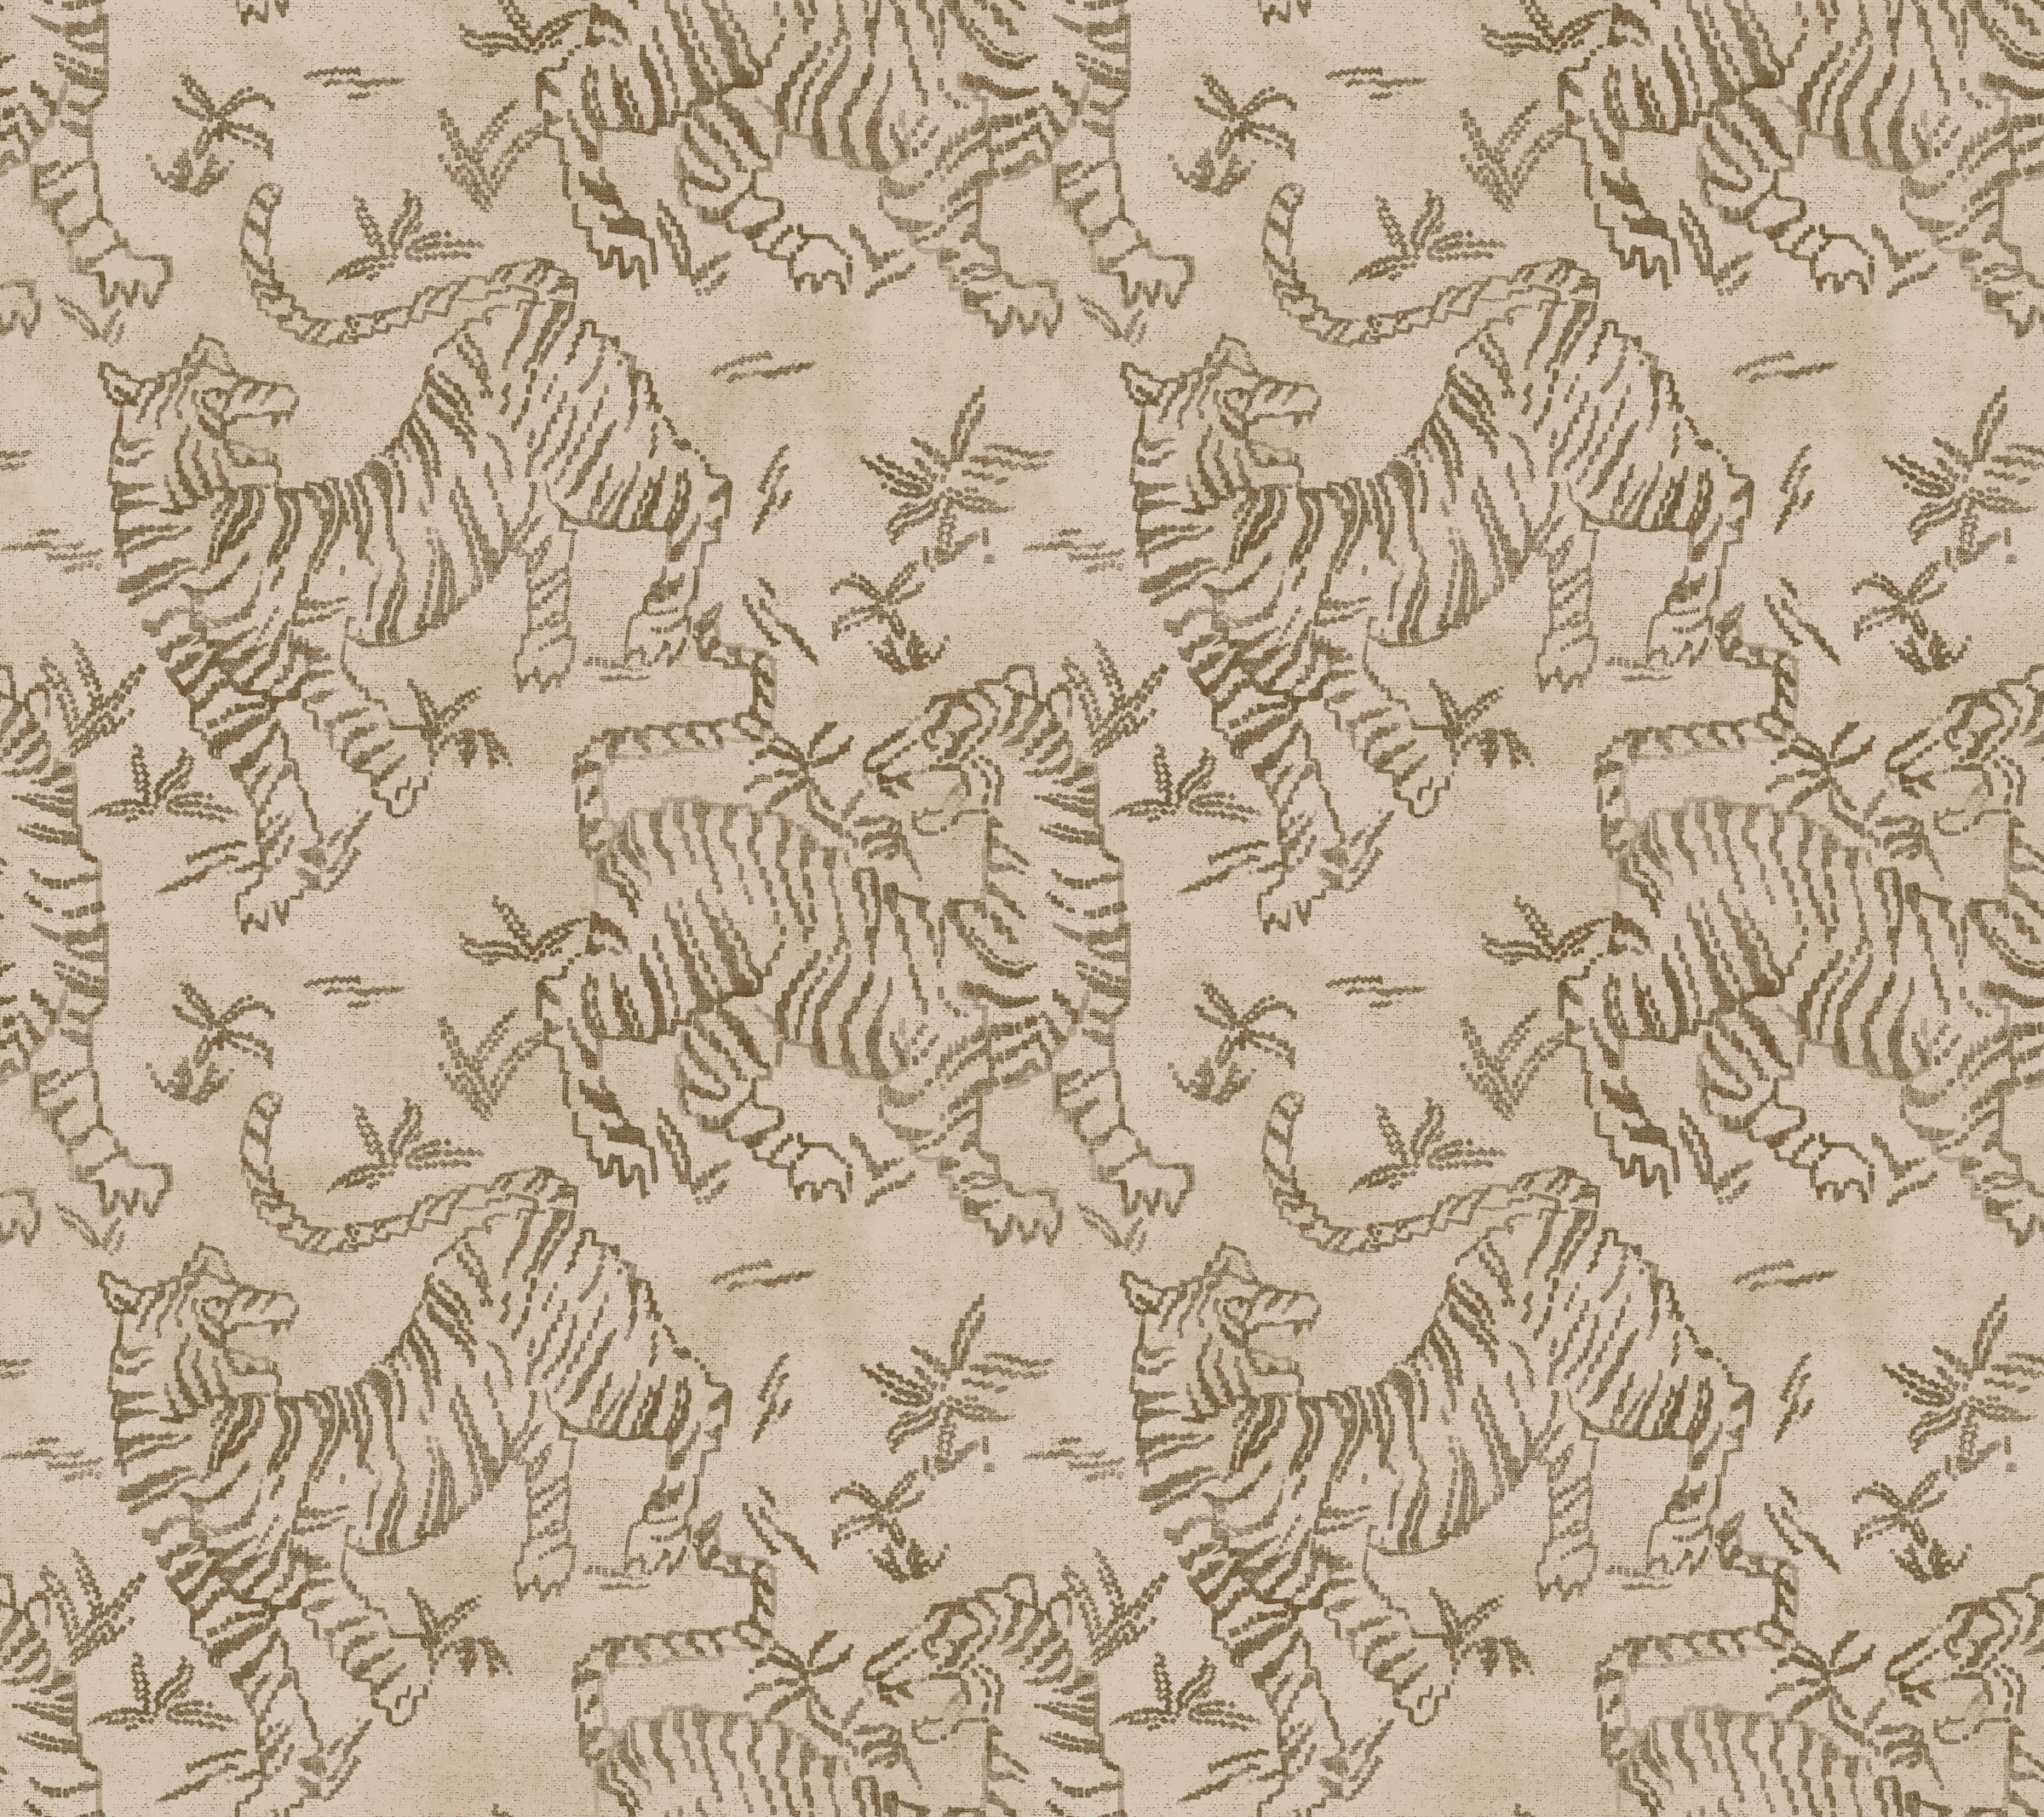 Orly Tigers Wallpaper Wallpaper York Designer Series Double Roll Blush/Brown 